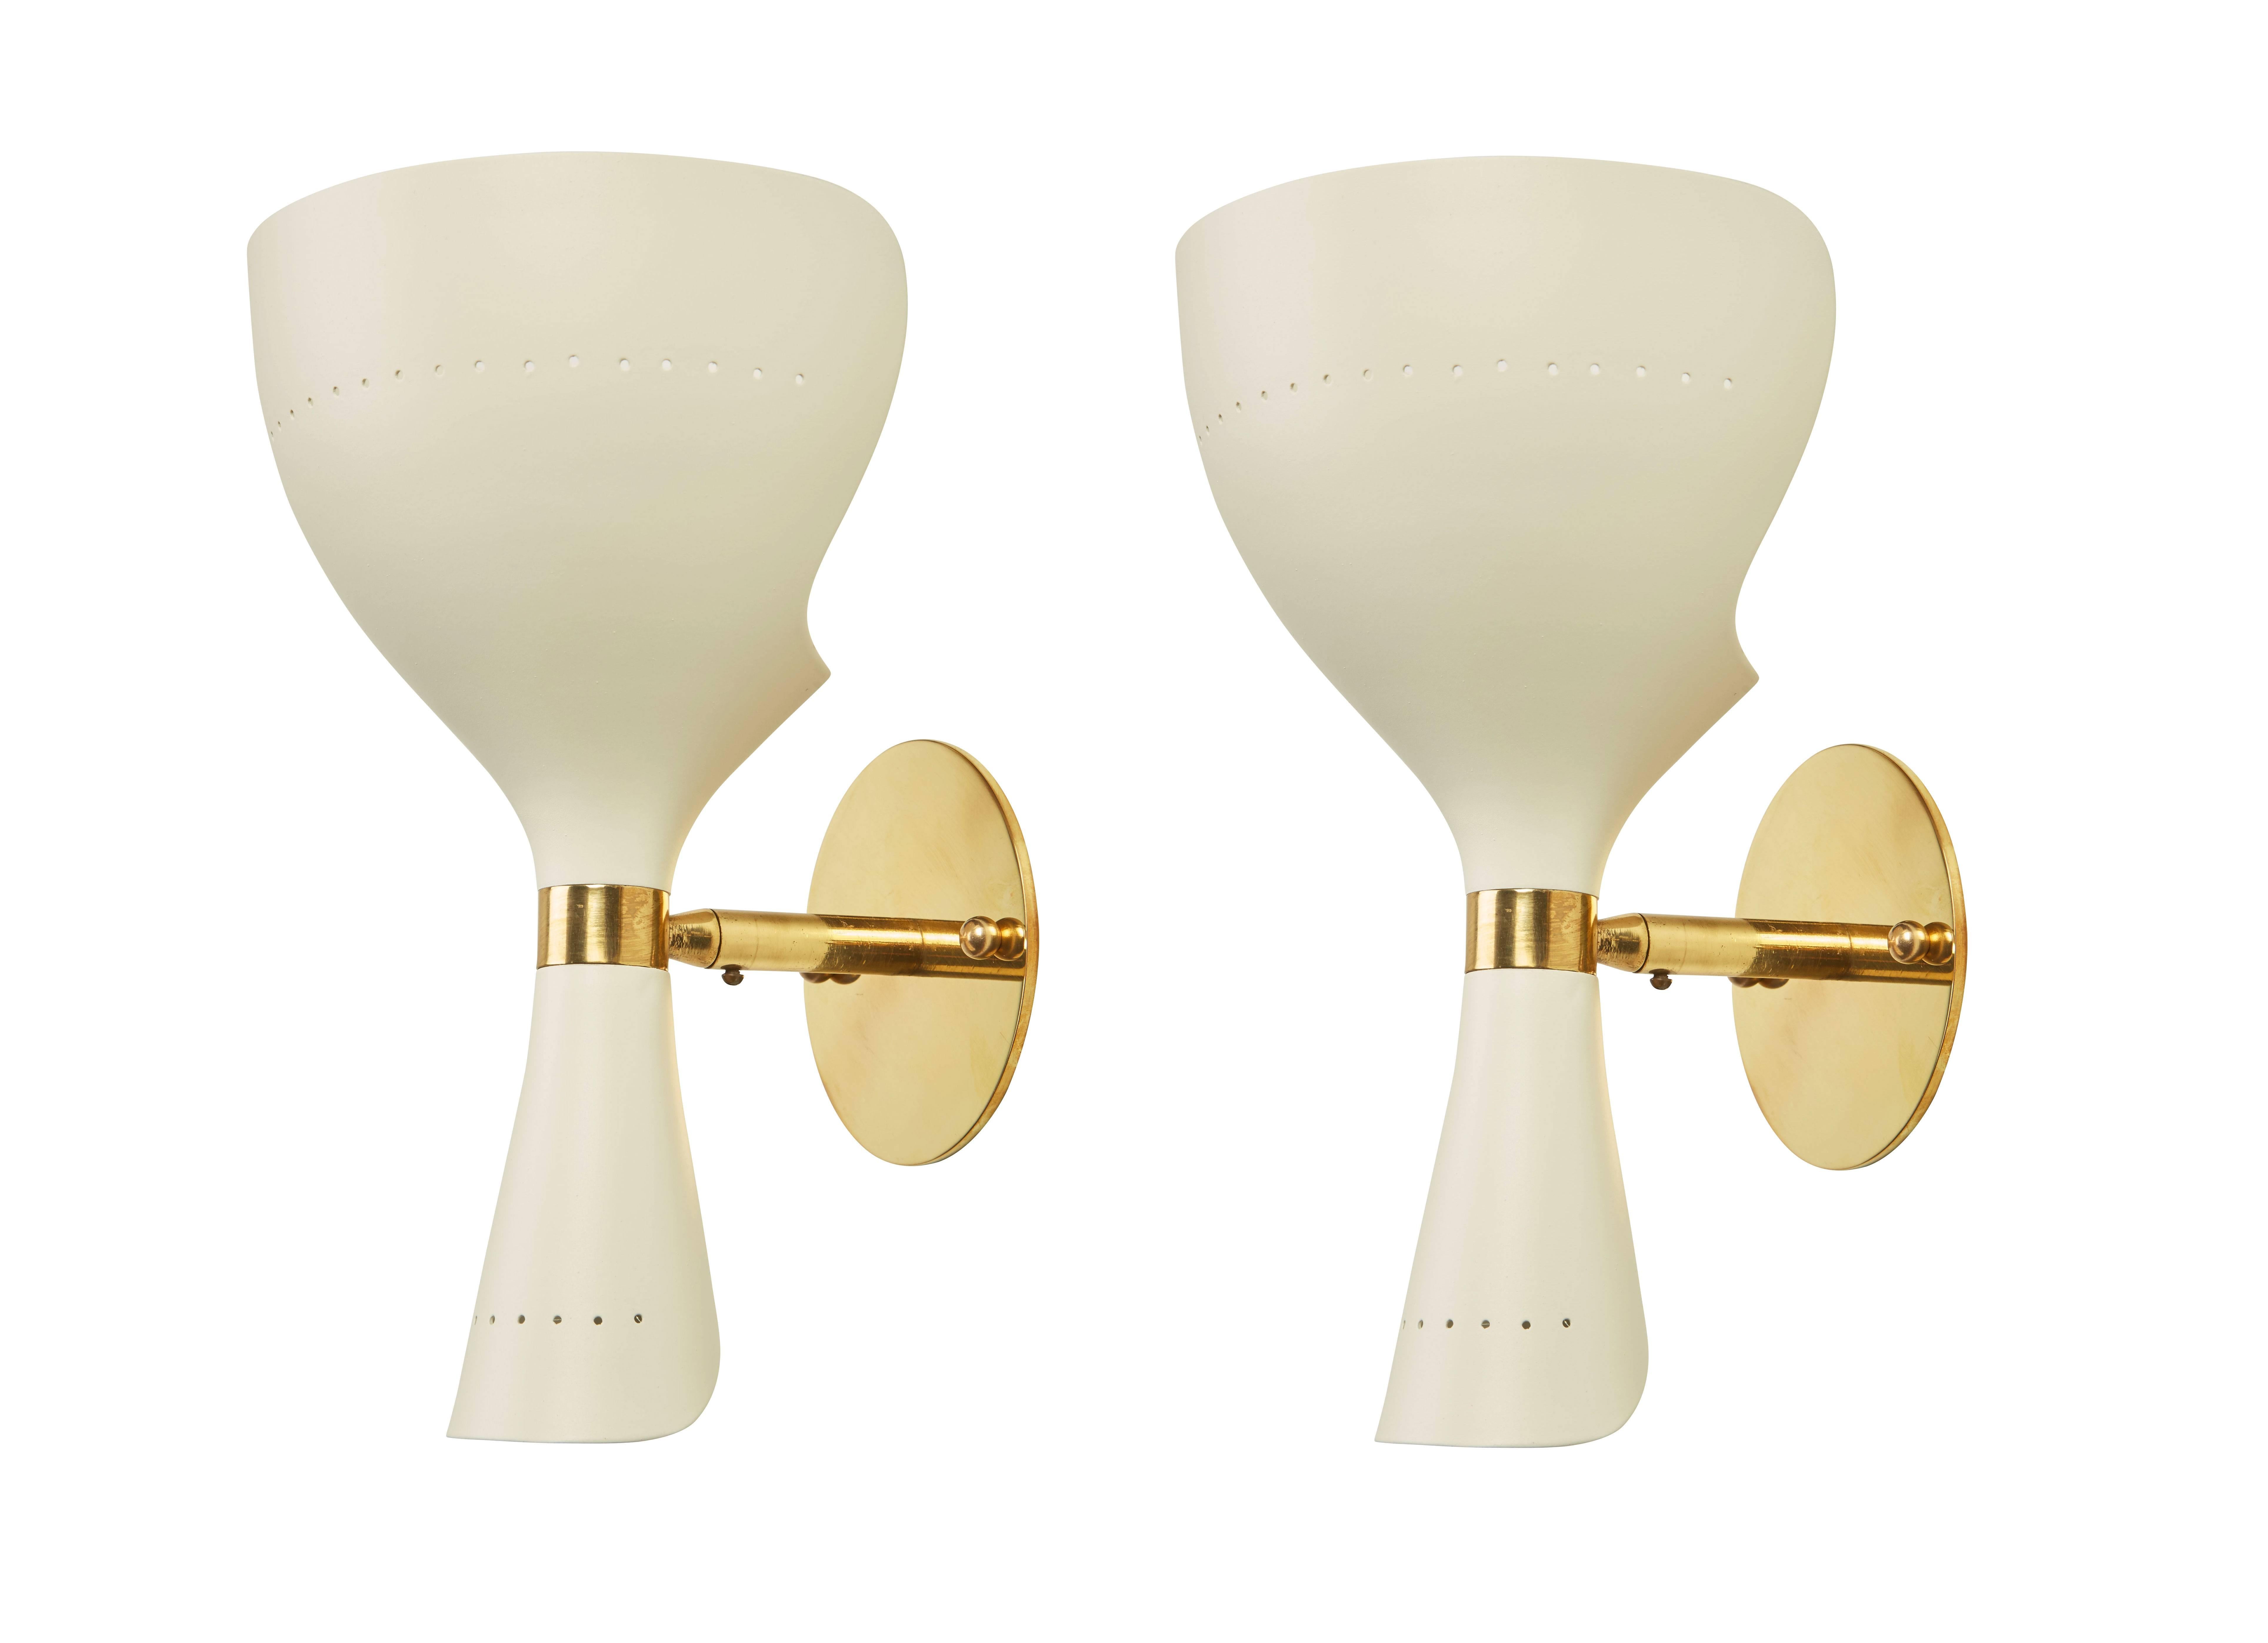 Pair of enameled metal and brass sconces manufactured in Italy by Stilnovo, circa 1950s. Sconces can be mounted in either direction with the small part of the shade on the bottom, or the small part of the shade at the top. Perforation to top and